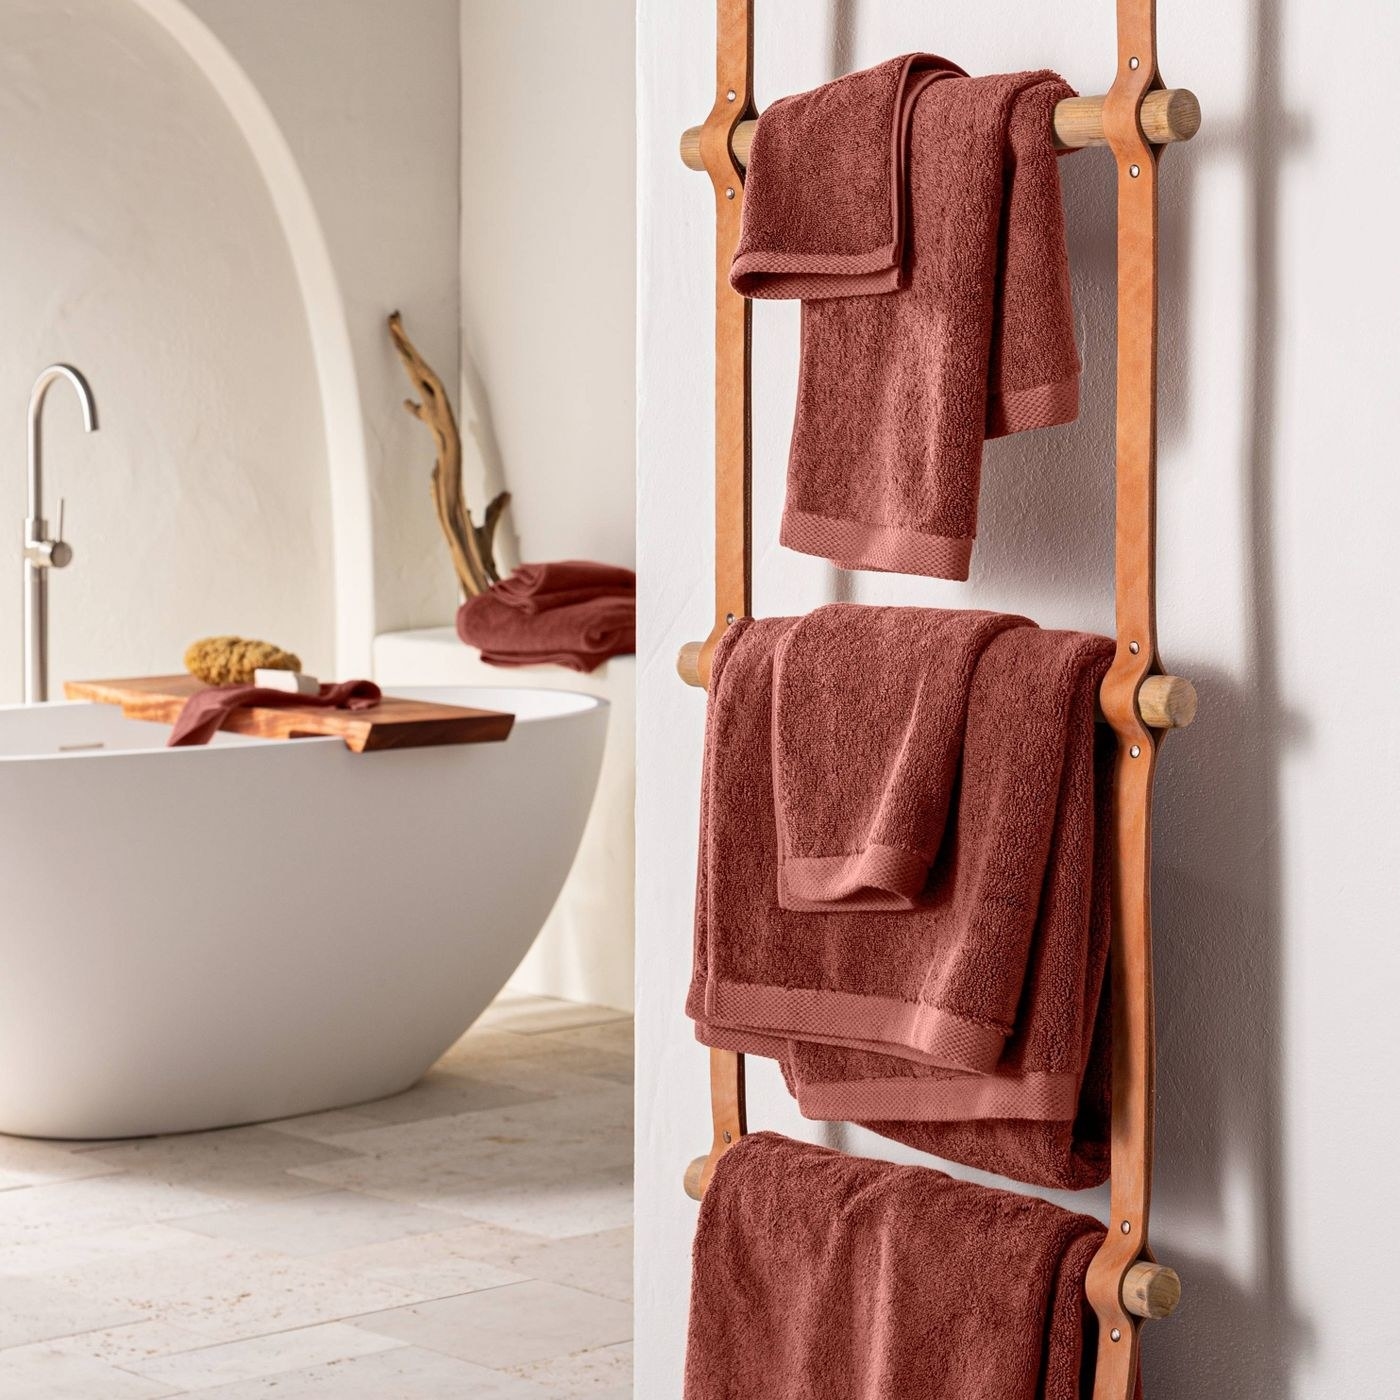 towels of different sizes hung next to a bathtub